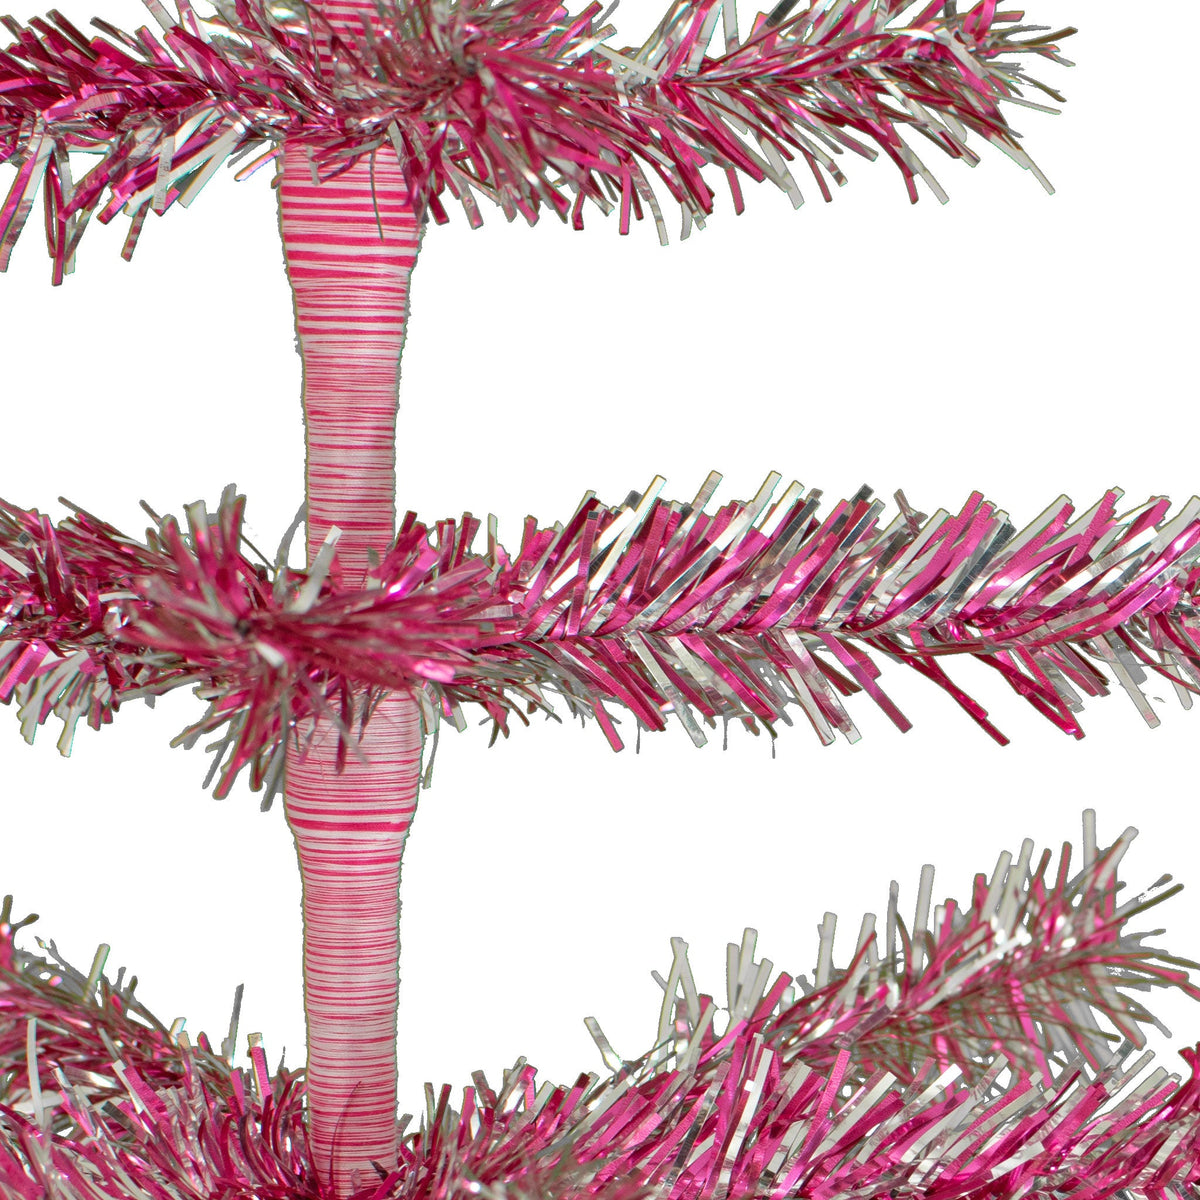 Firework Tinsel Brush: Lee Display builds each tree using garlands mixed with multiple colors of tinsel.   Each garland is cut to size and fit onto each row of branches.  Creating a firework tinsel style of metallic and shiny colors.